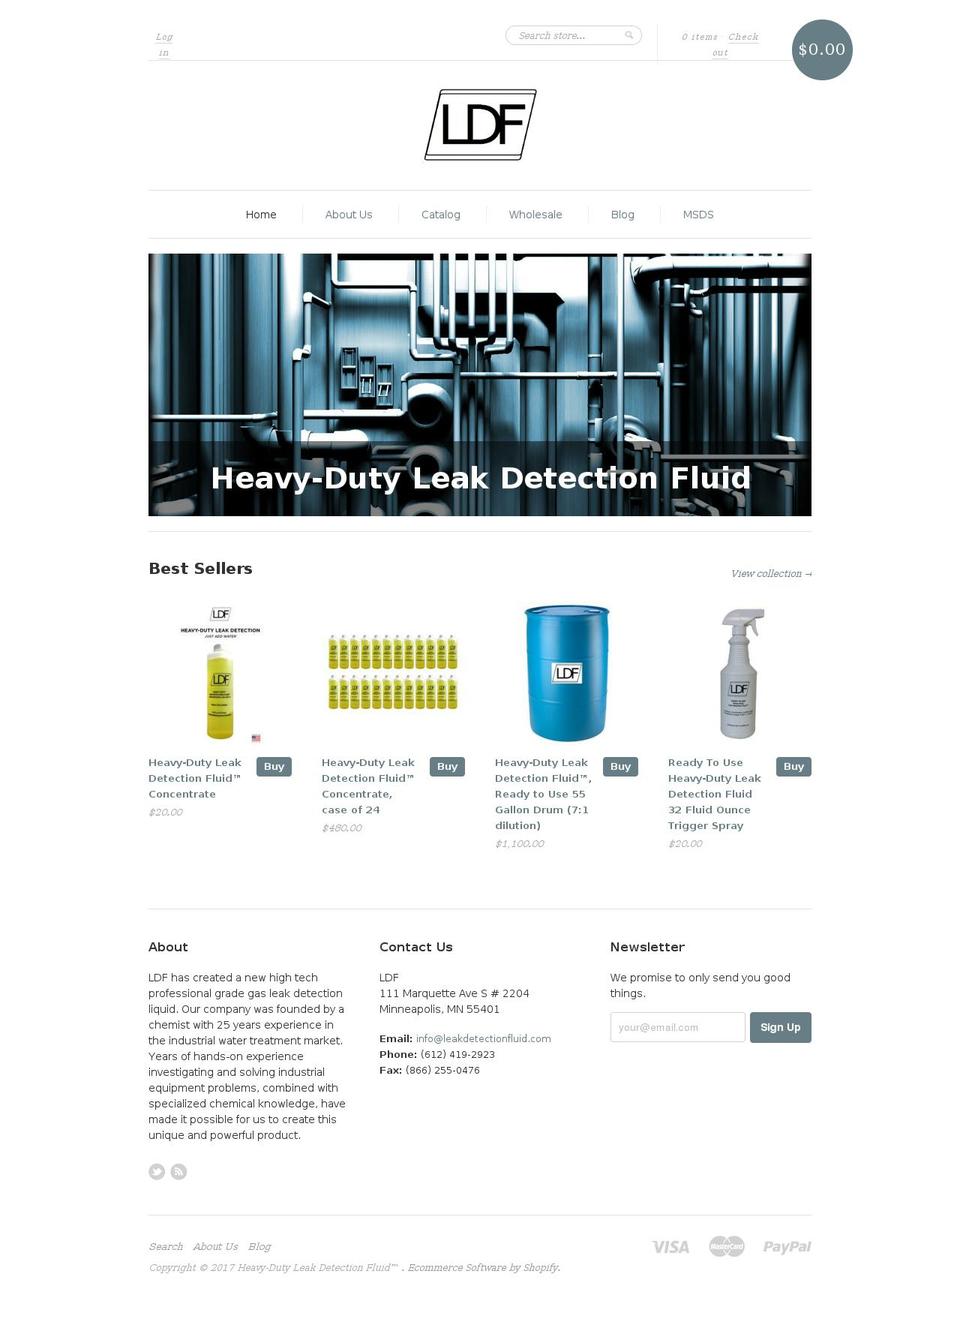 new-standard Shopify theme site example leakdetectionfluid.com